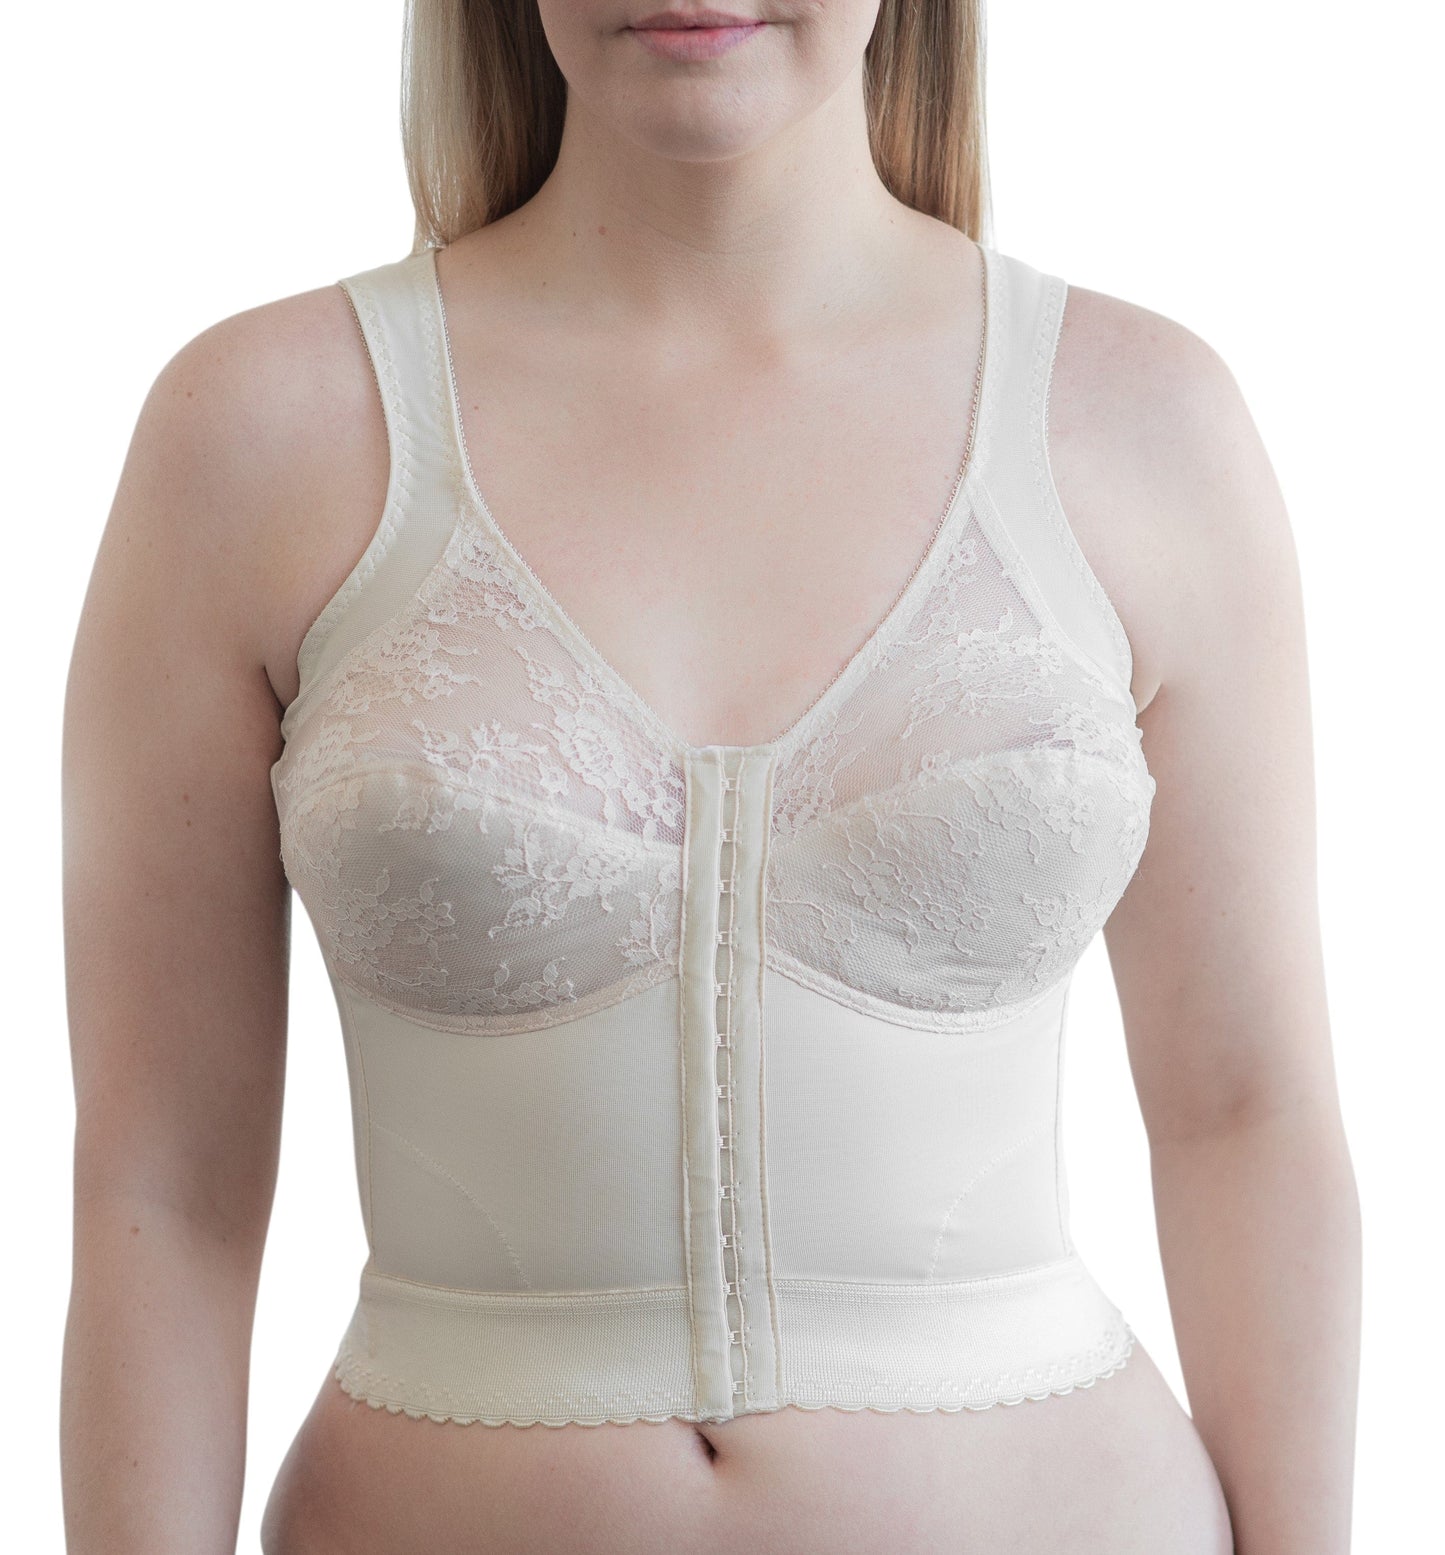 Wholesale front fastening bra For Supportive Underwear 